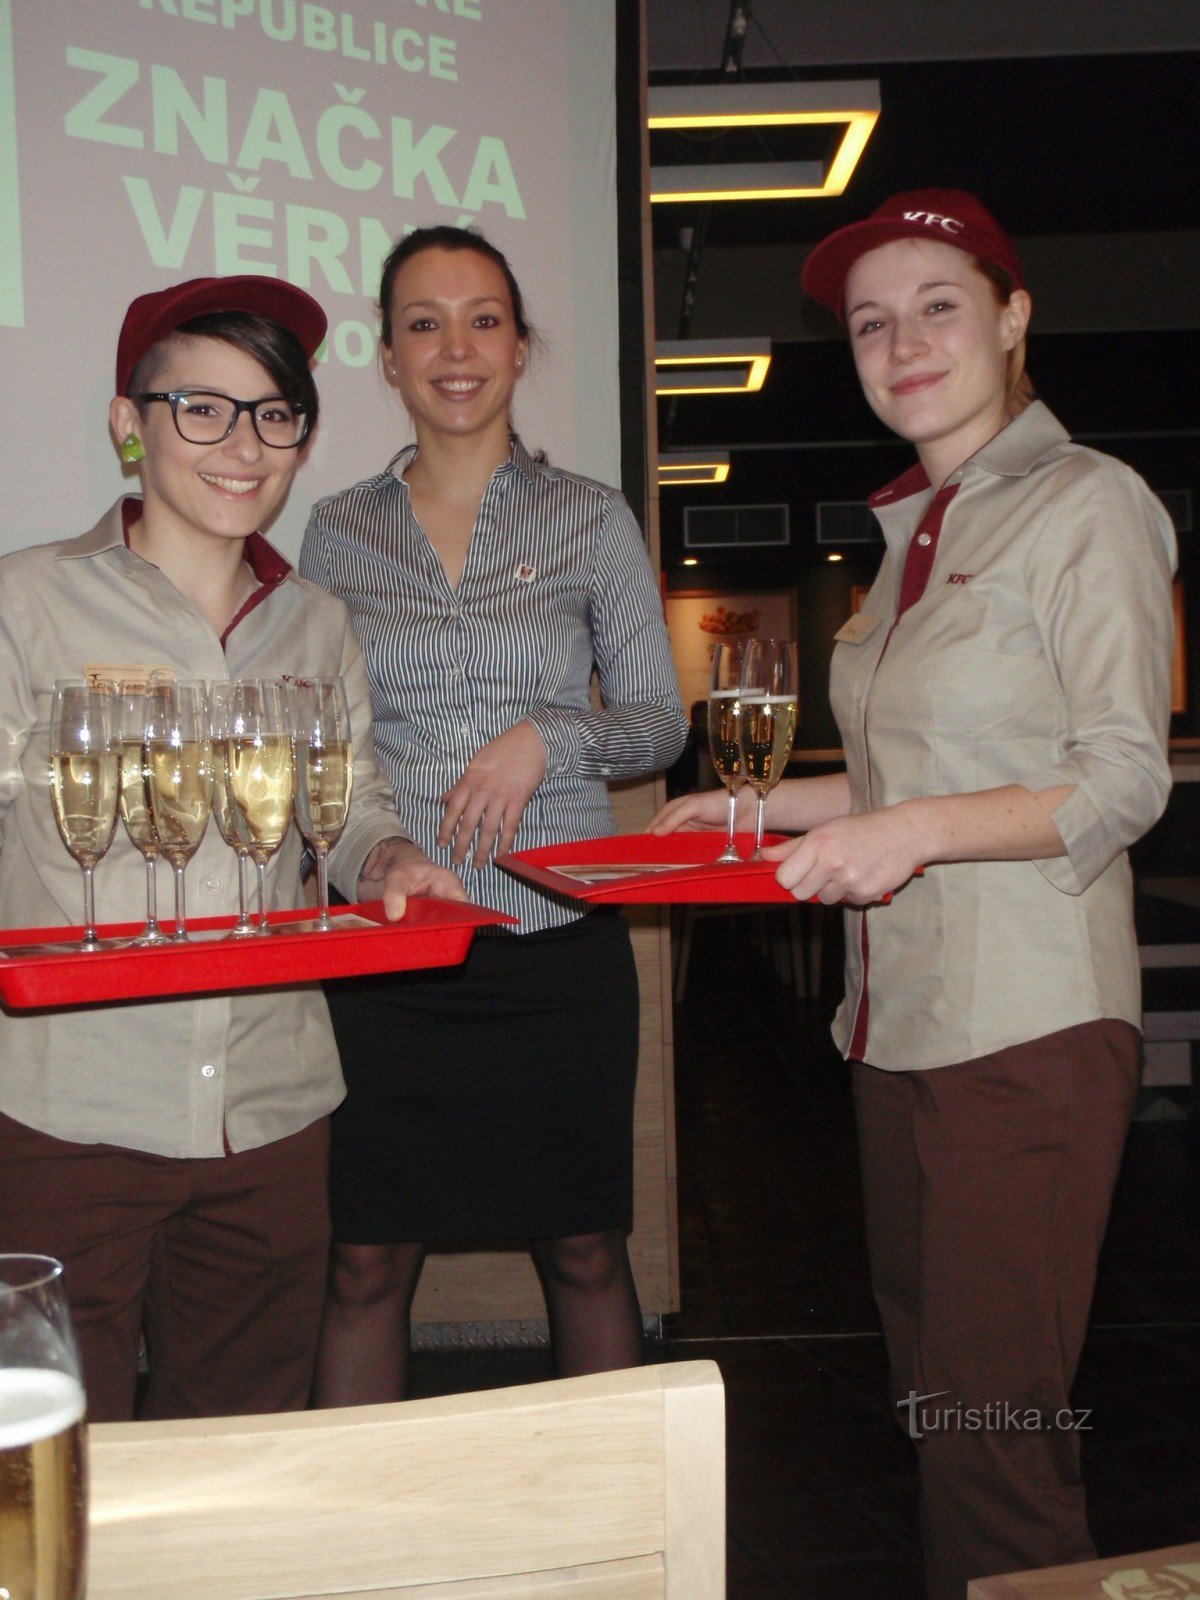 opens in style: lovely girls with sparkling wine